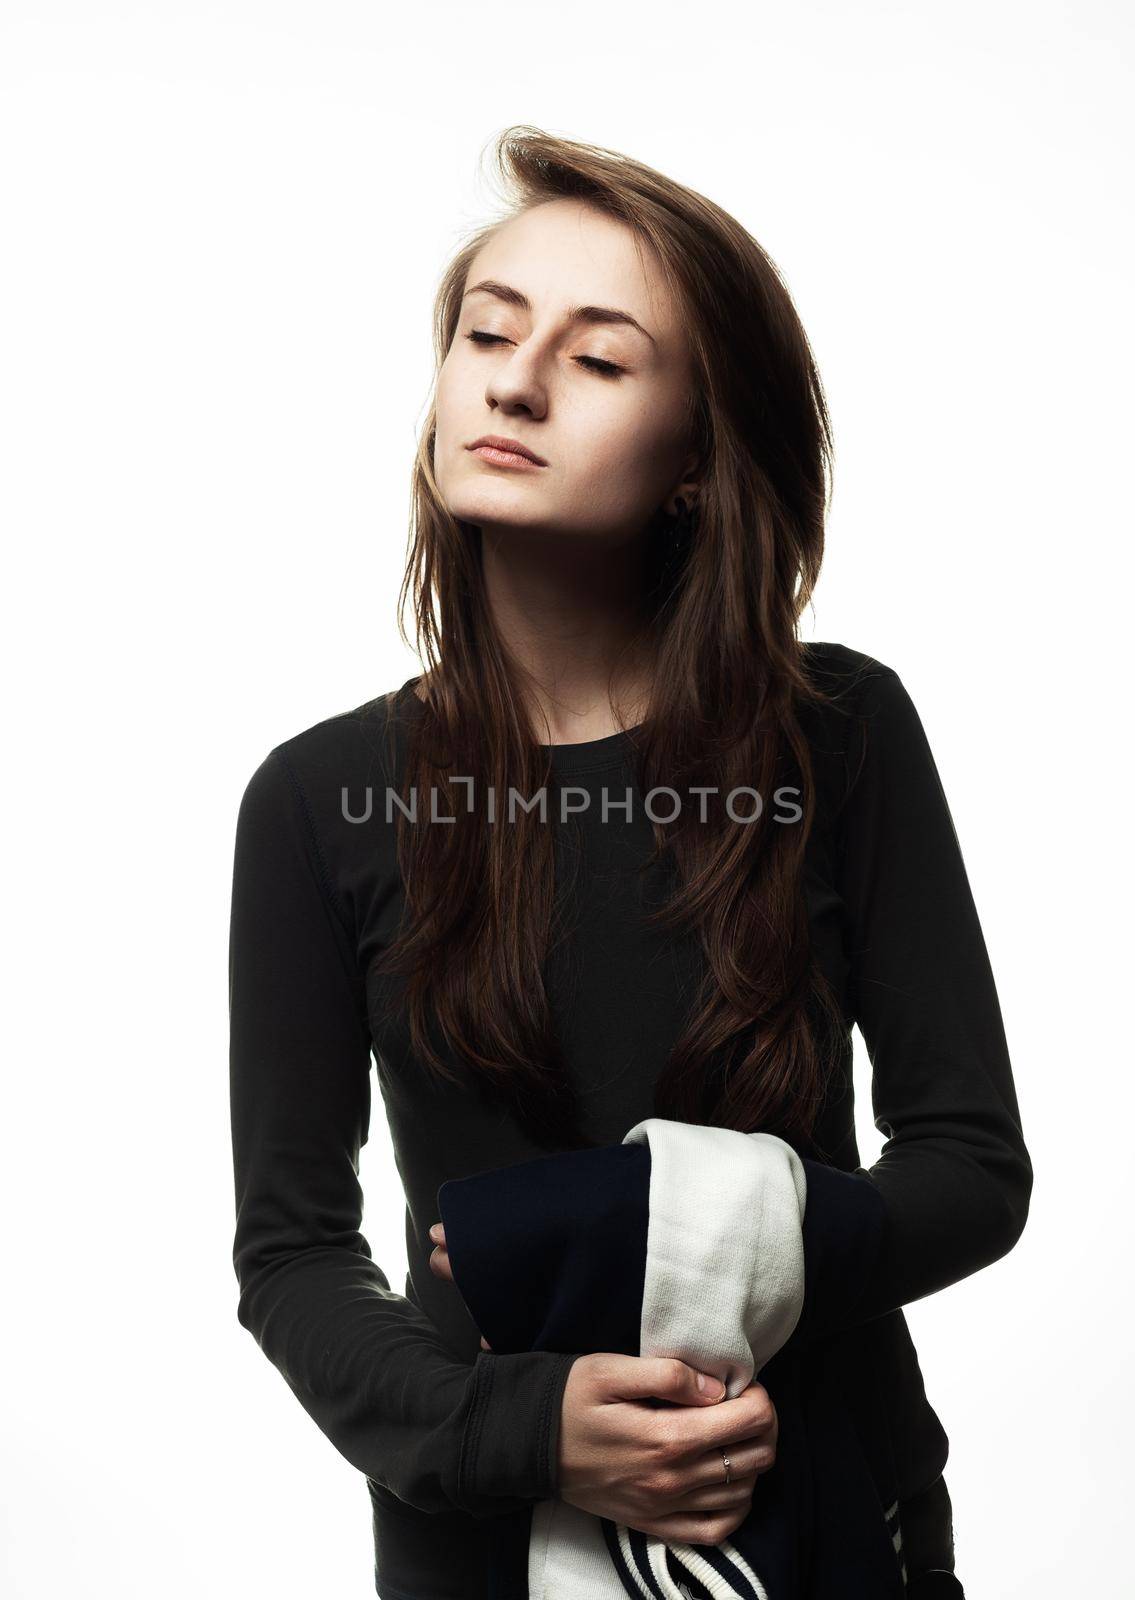 Happy teenage girl. Fashion, portrait and people concept. Portrait of a young emotional and stylish woman on a light background in the studio